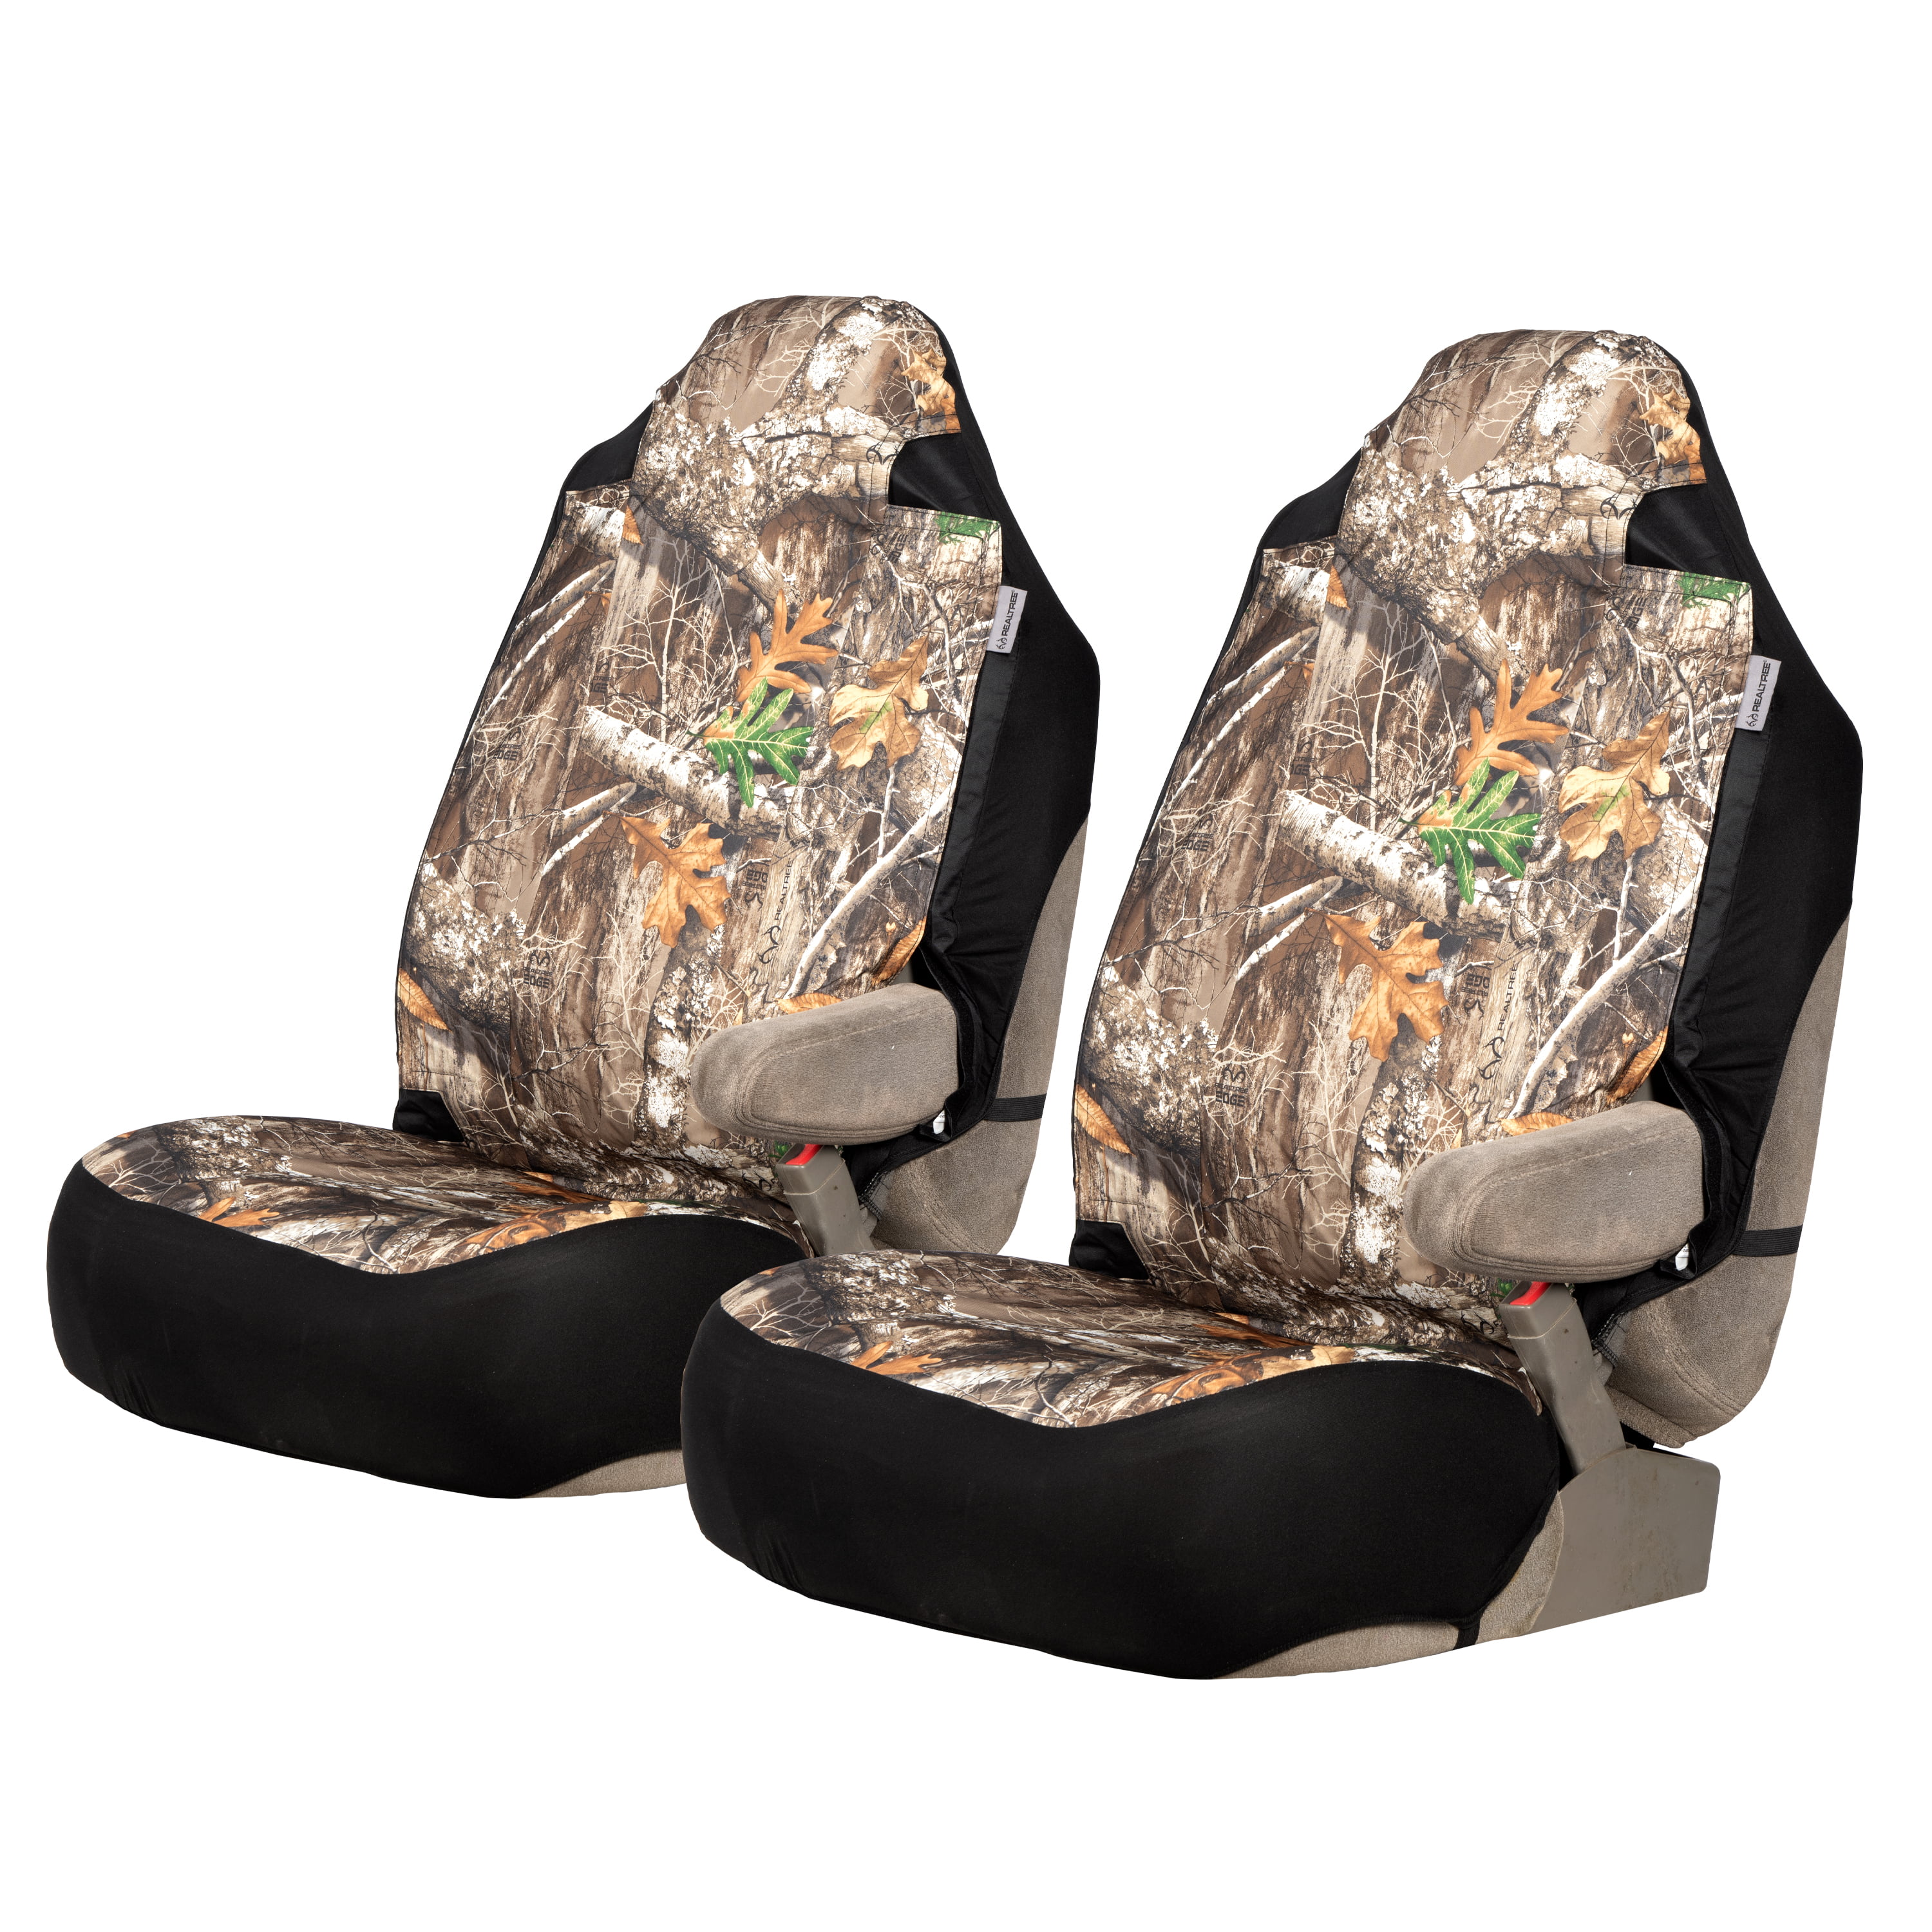 Signature Products Group MSC4409 Mossy Oak Camo Universal Bucket Seat Cover Mossy Oak Infinity Camo, Heavy-Duty Polyester Fabric, Sold Individually SPG 